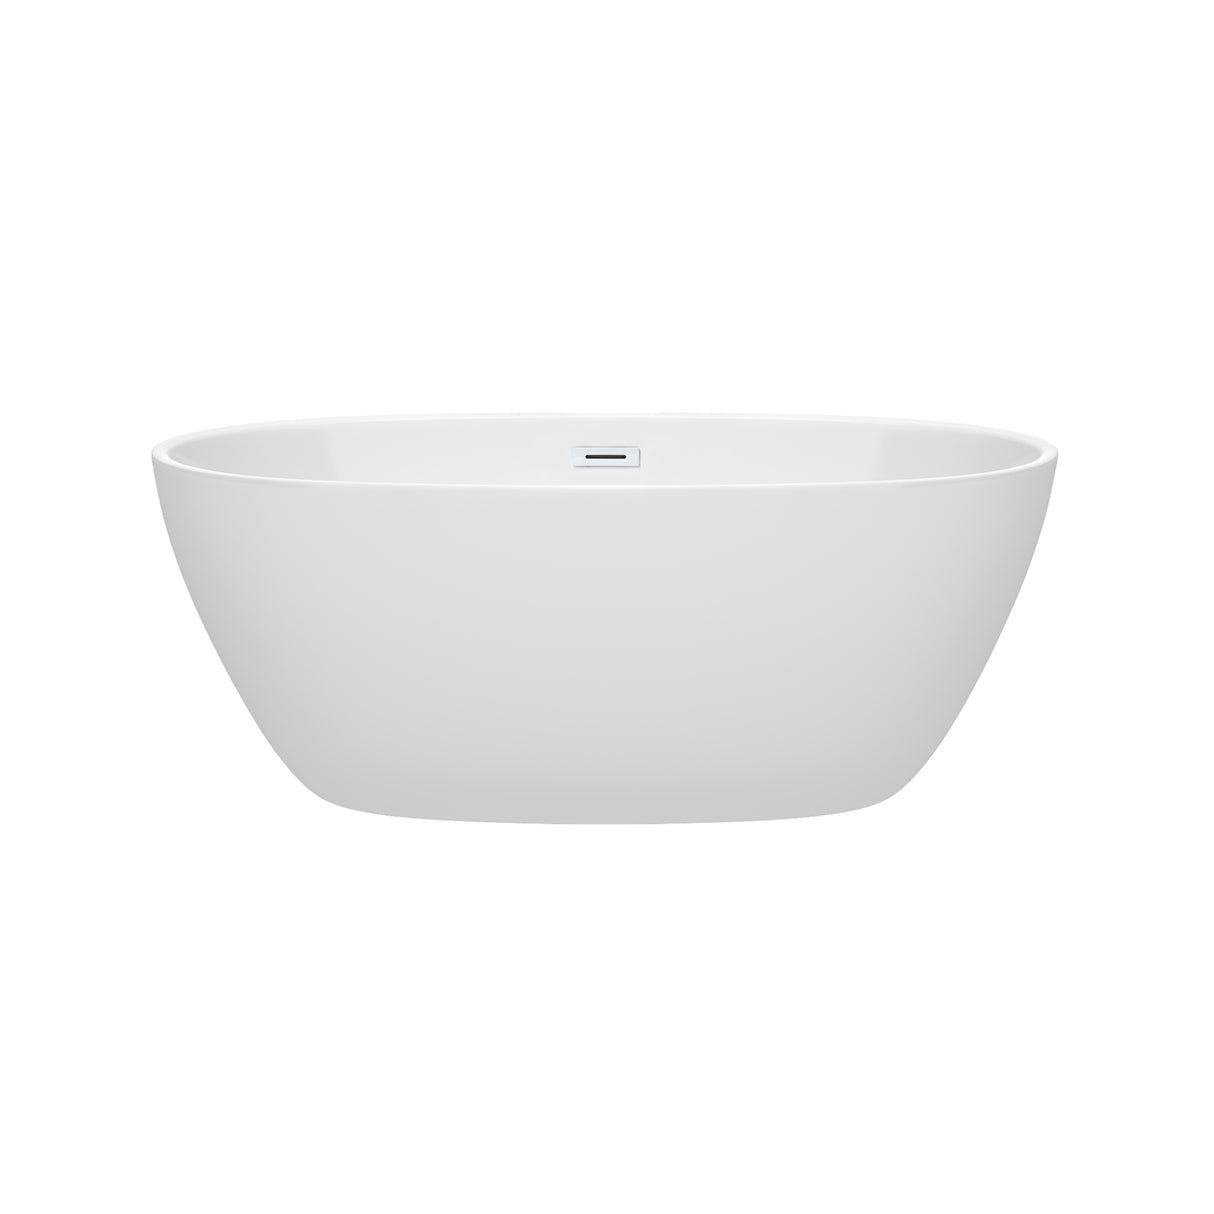 Juno 59 Inch Freestanding Bathtub in White with Shiny White Drain and Overflow Trim